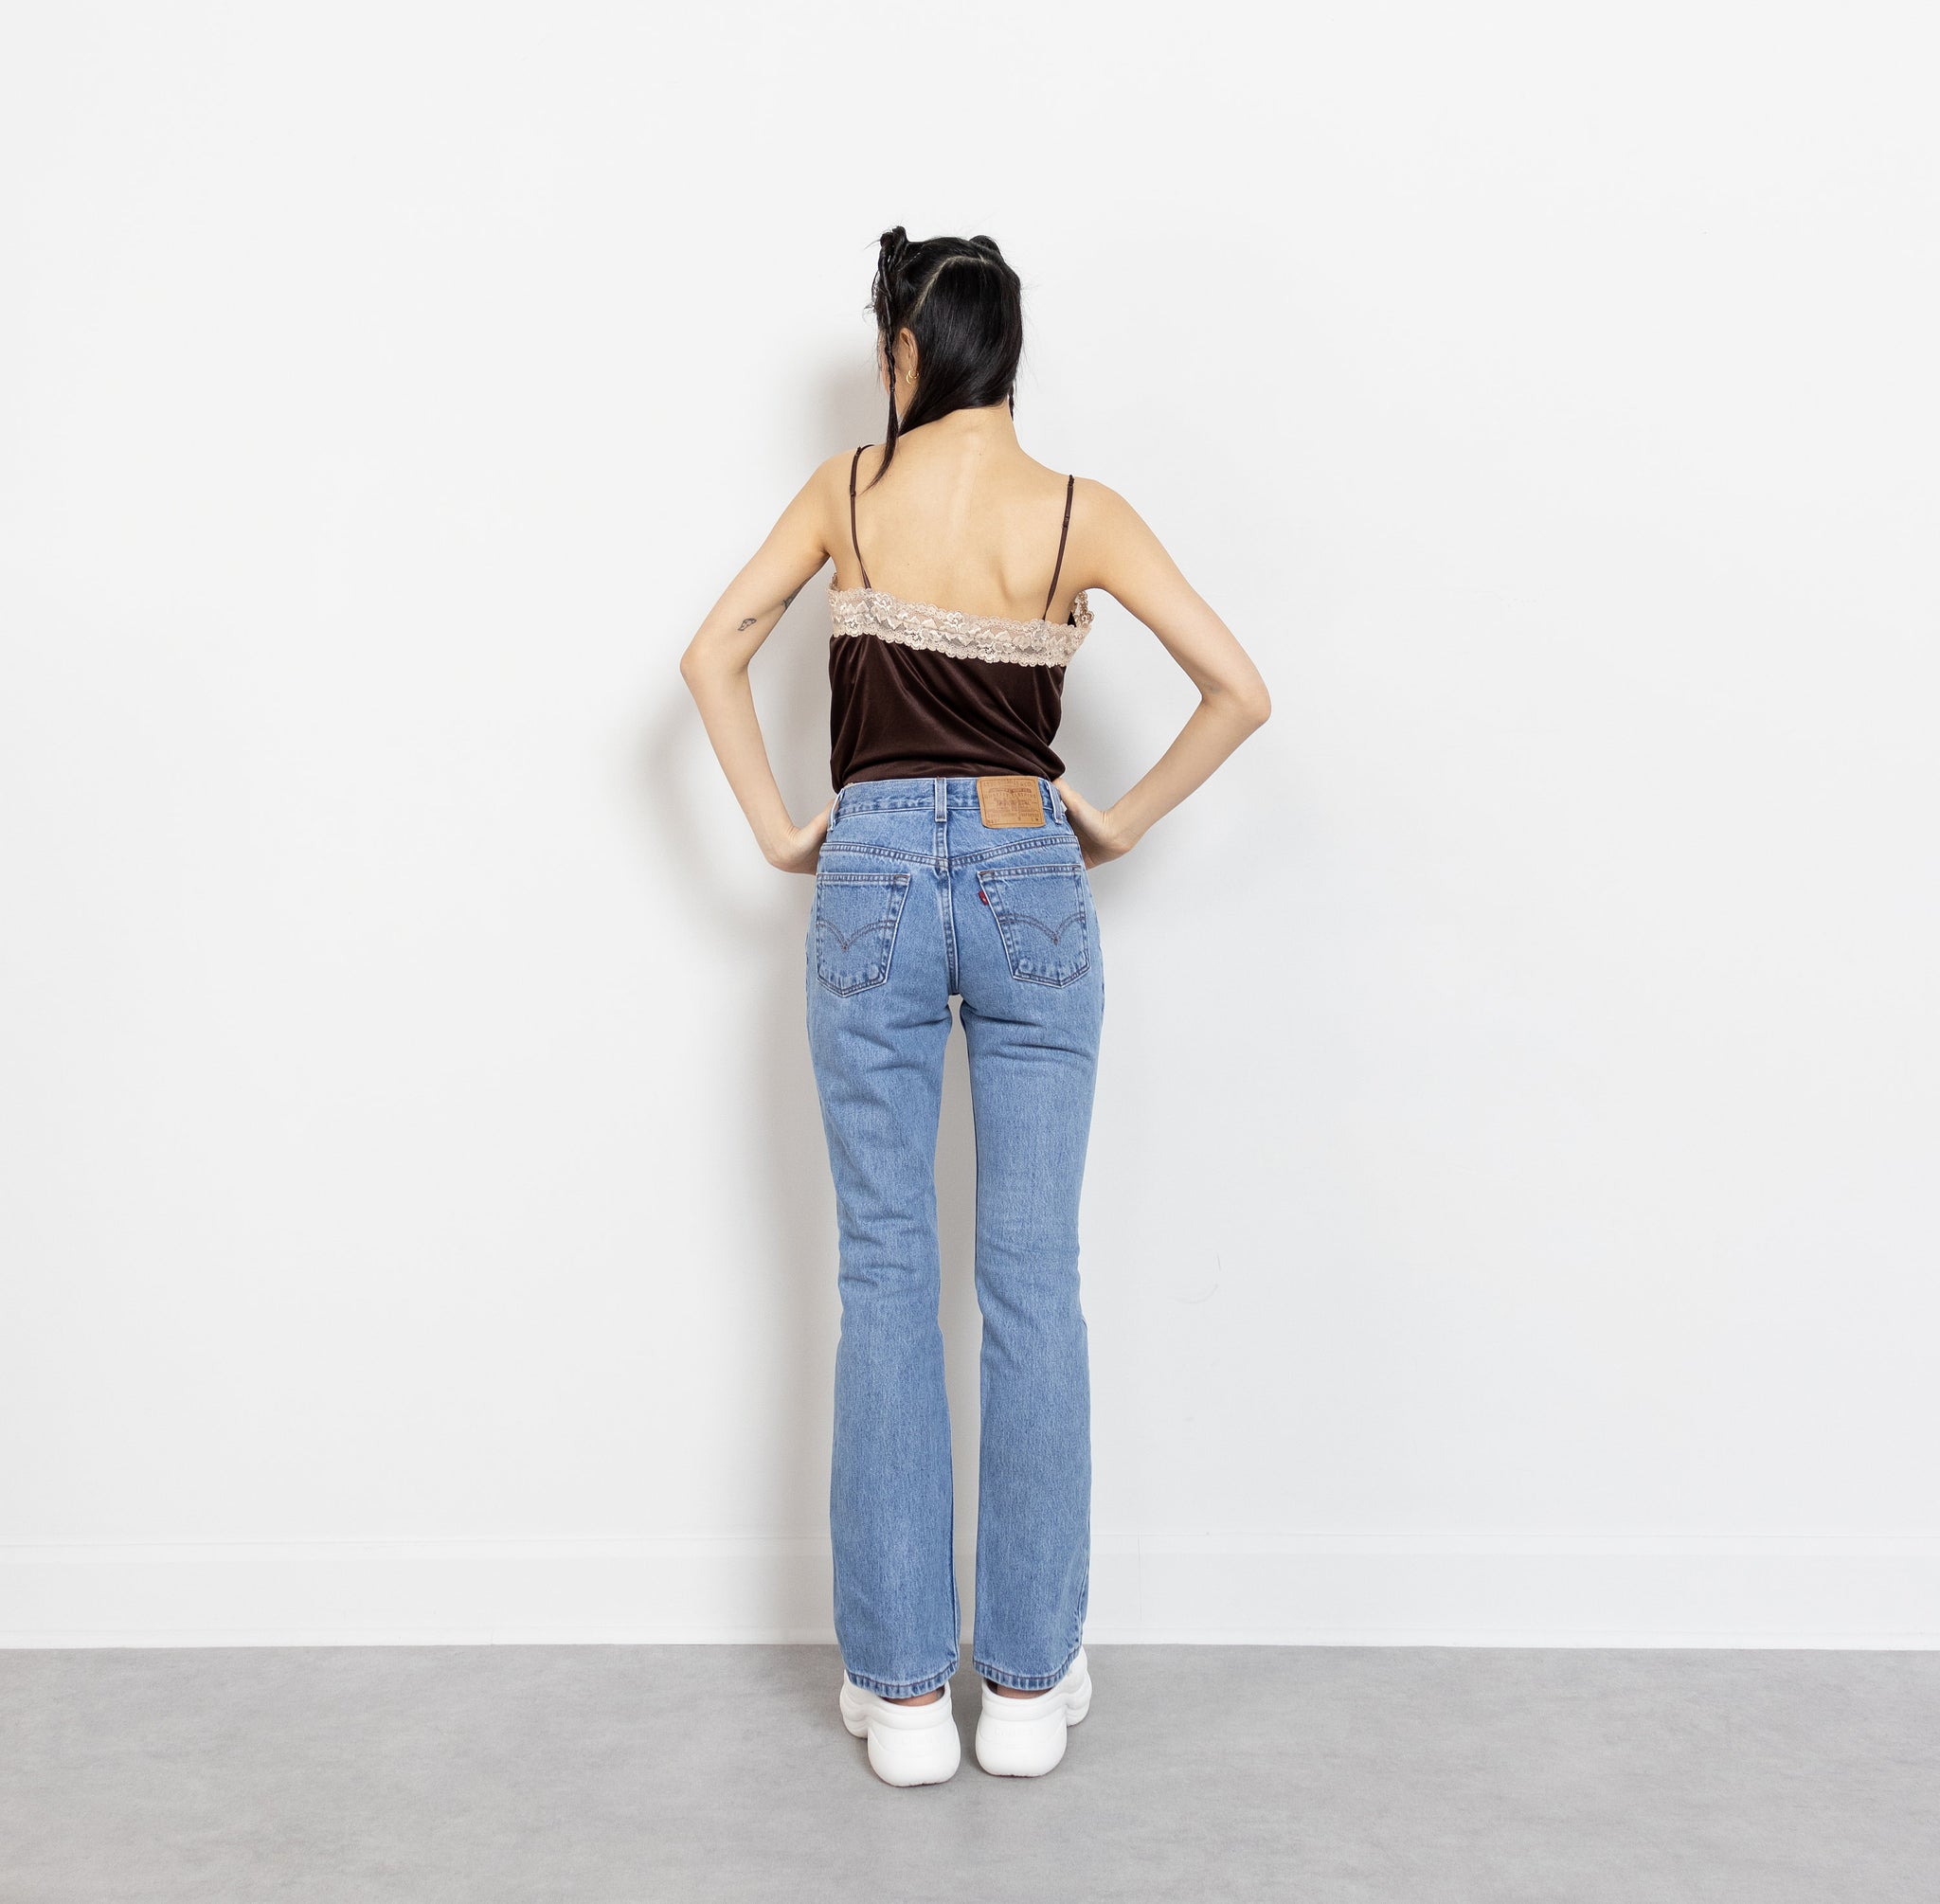 Vintage Levi's 517 Jeans For Women – Better Stay Together